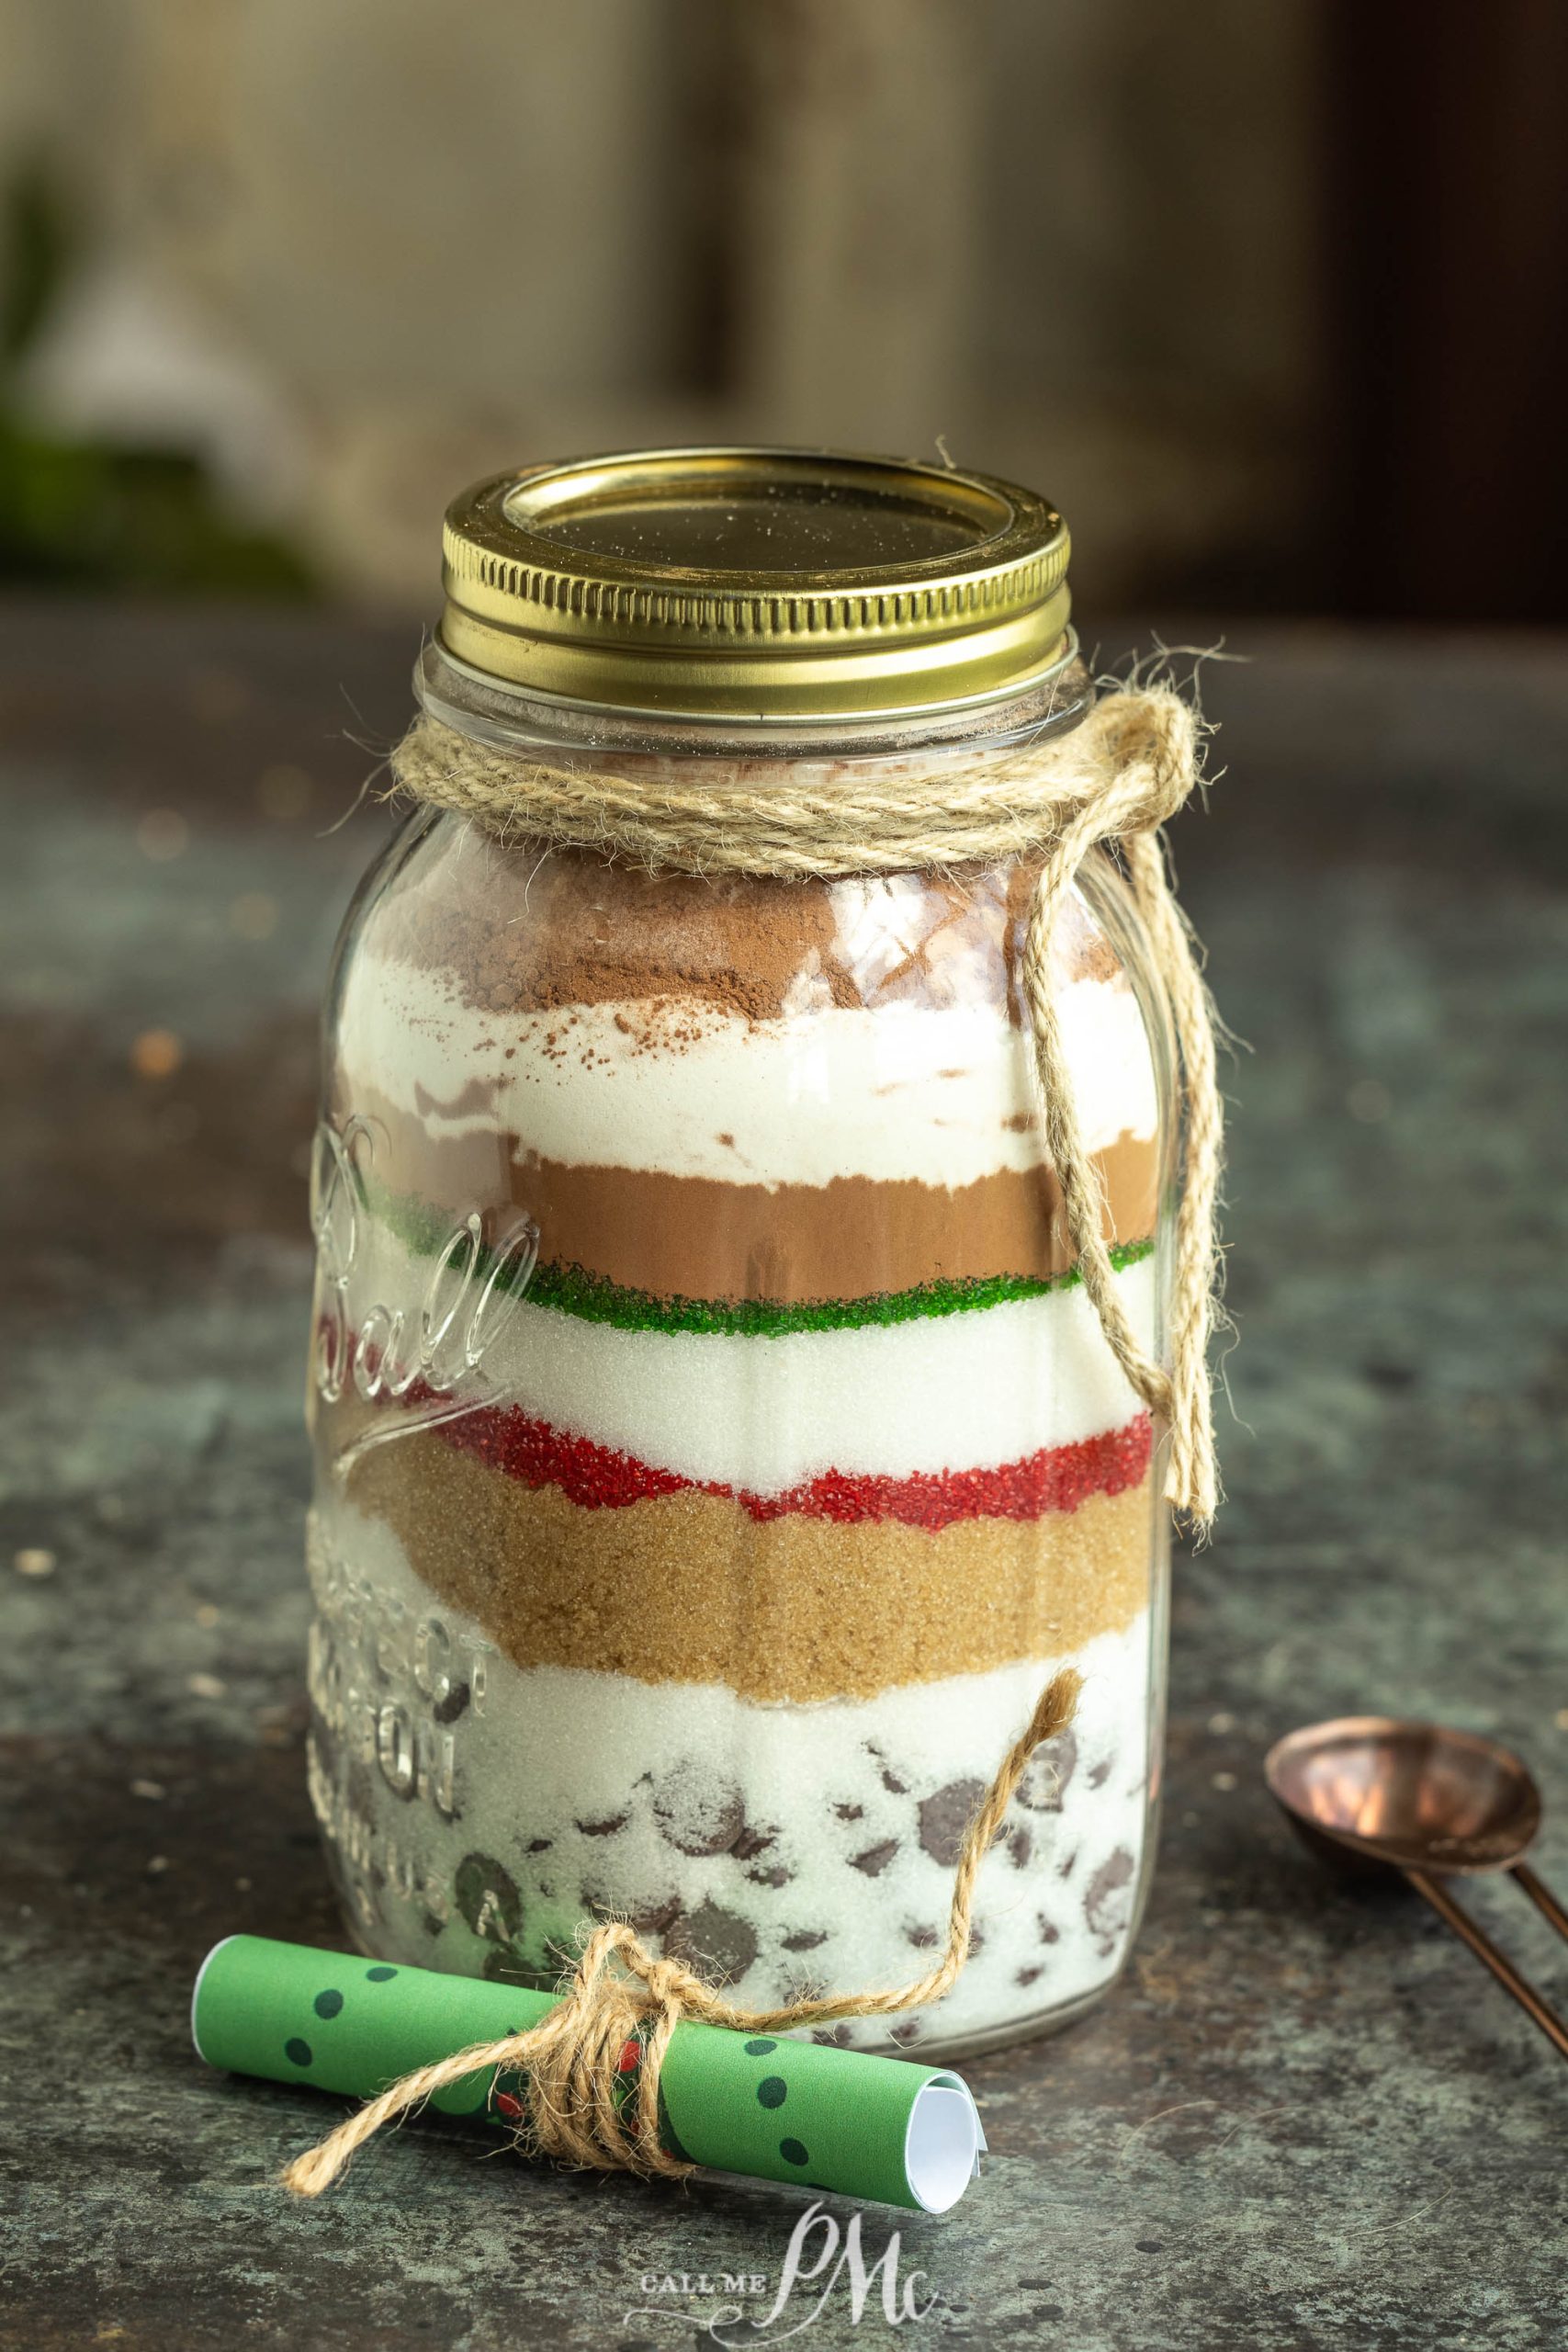 A mason jar filled with a mixture of cookies and ice cream.